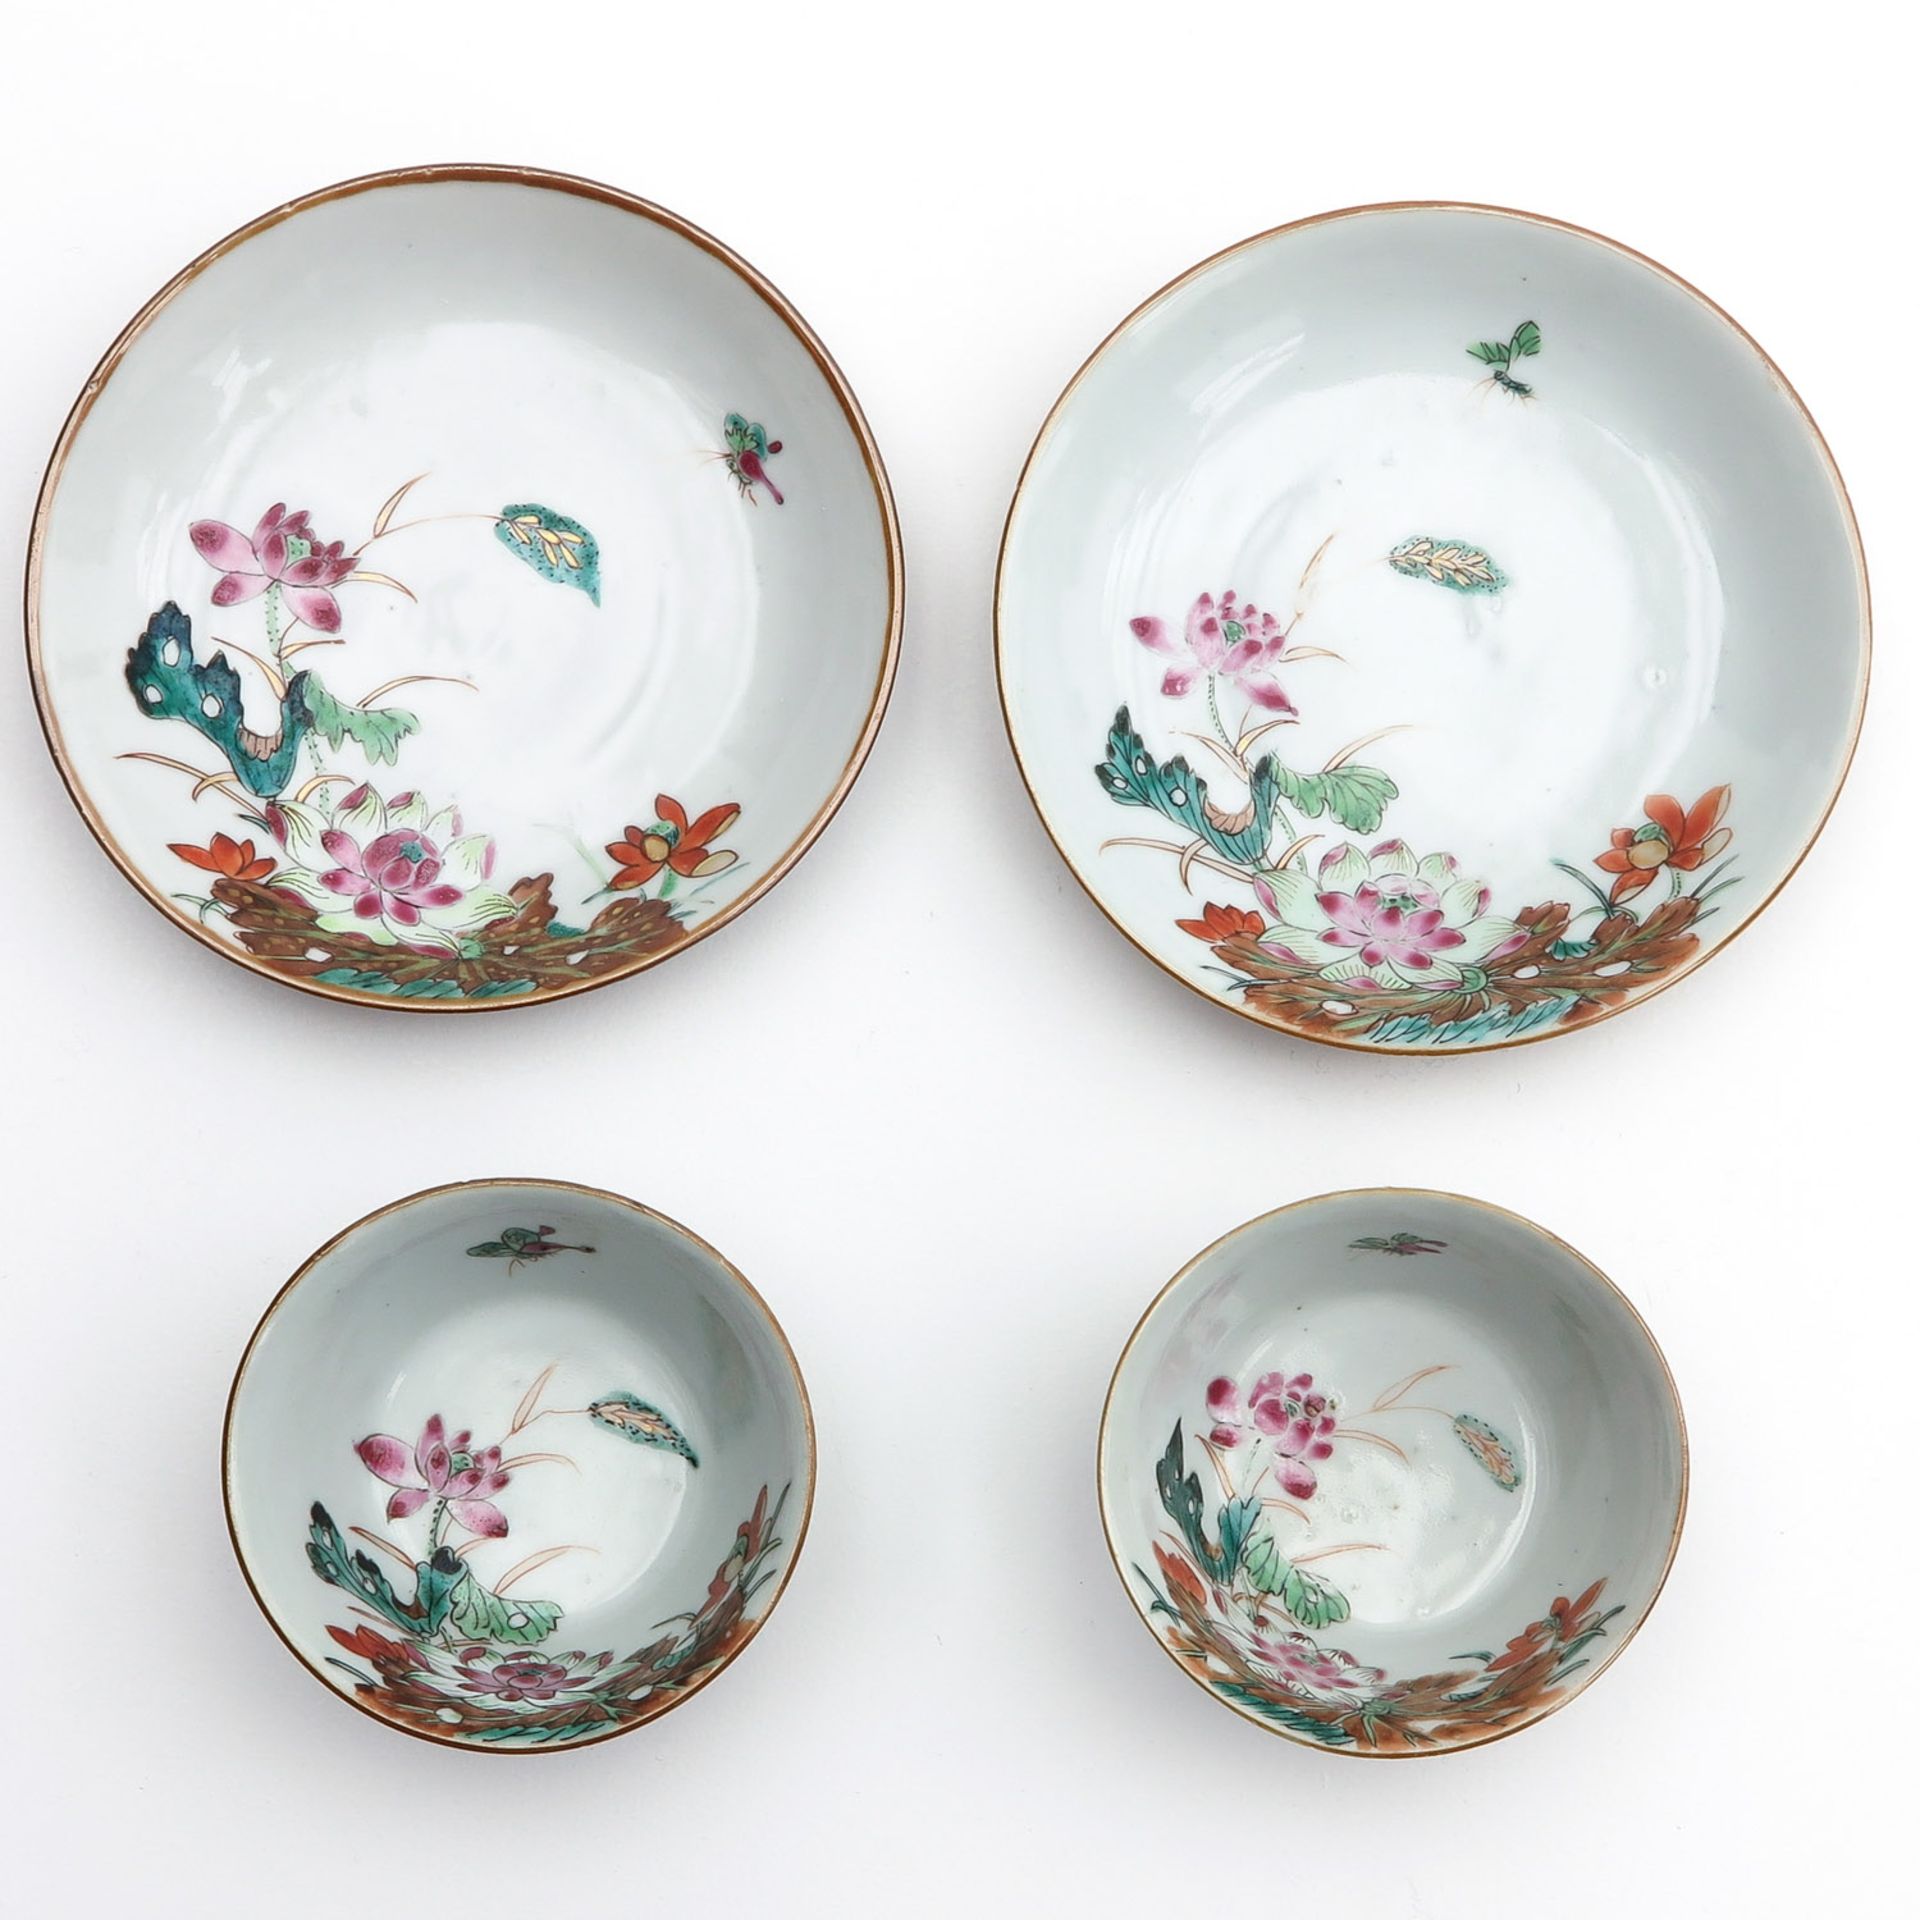 2 Famille Rose Decor Cups and Saucers - Image 5 of 9